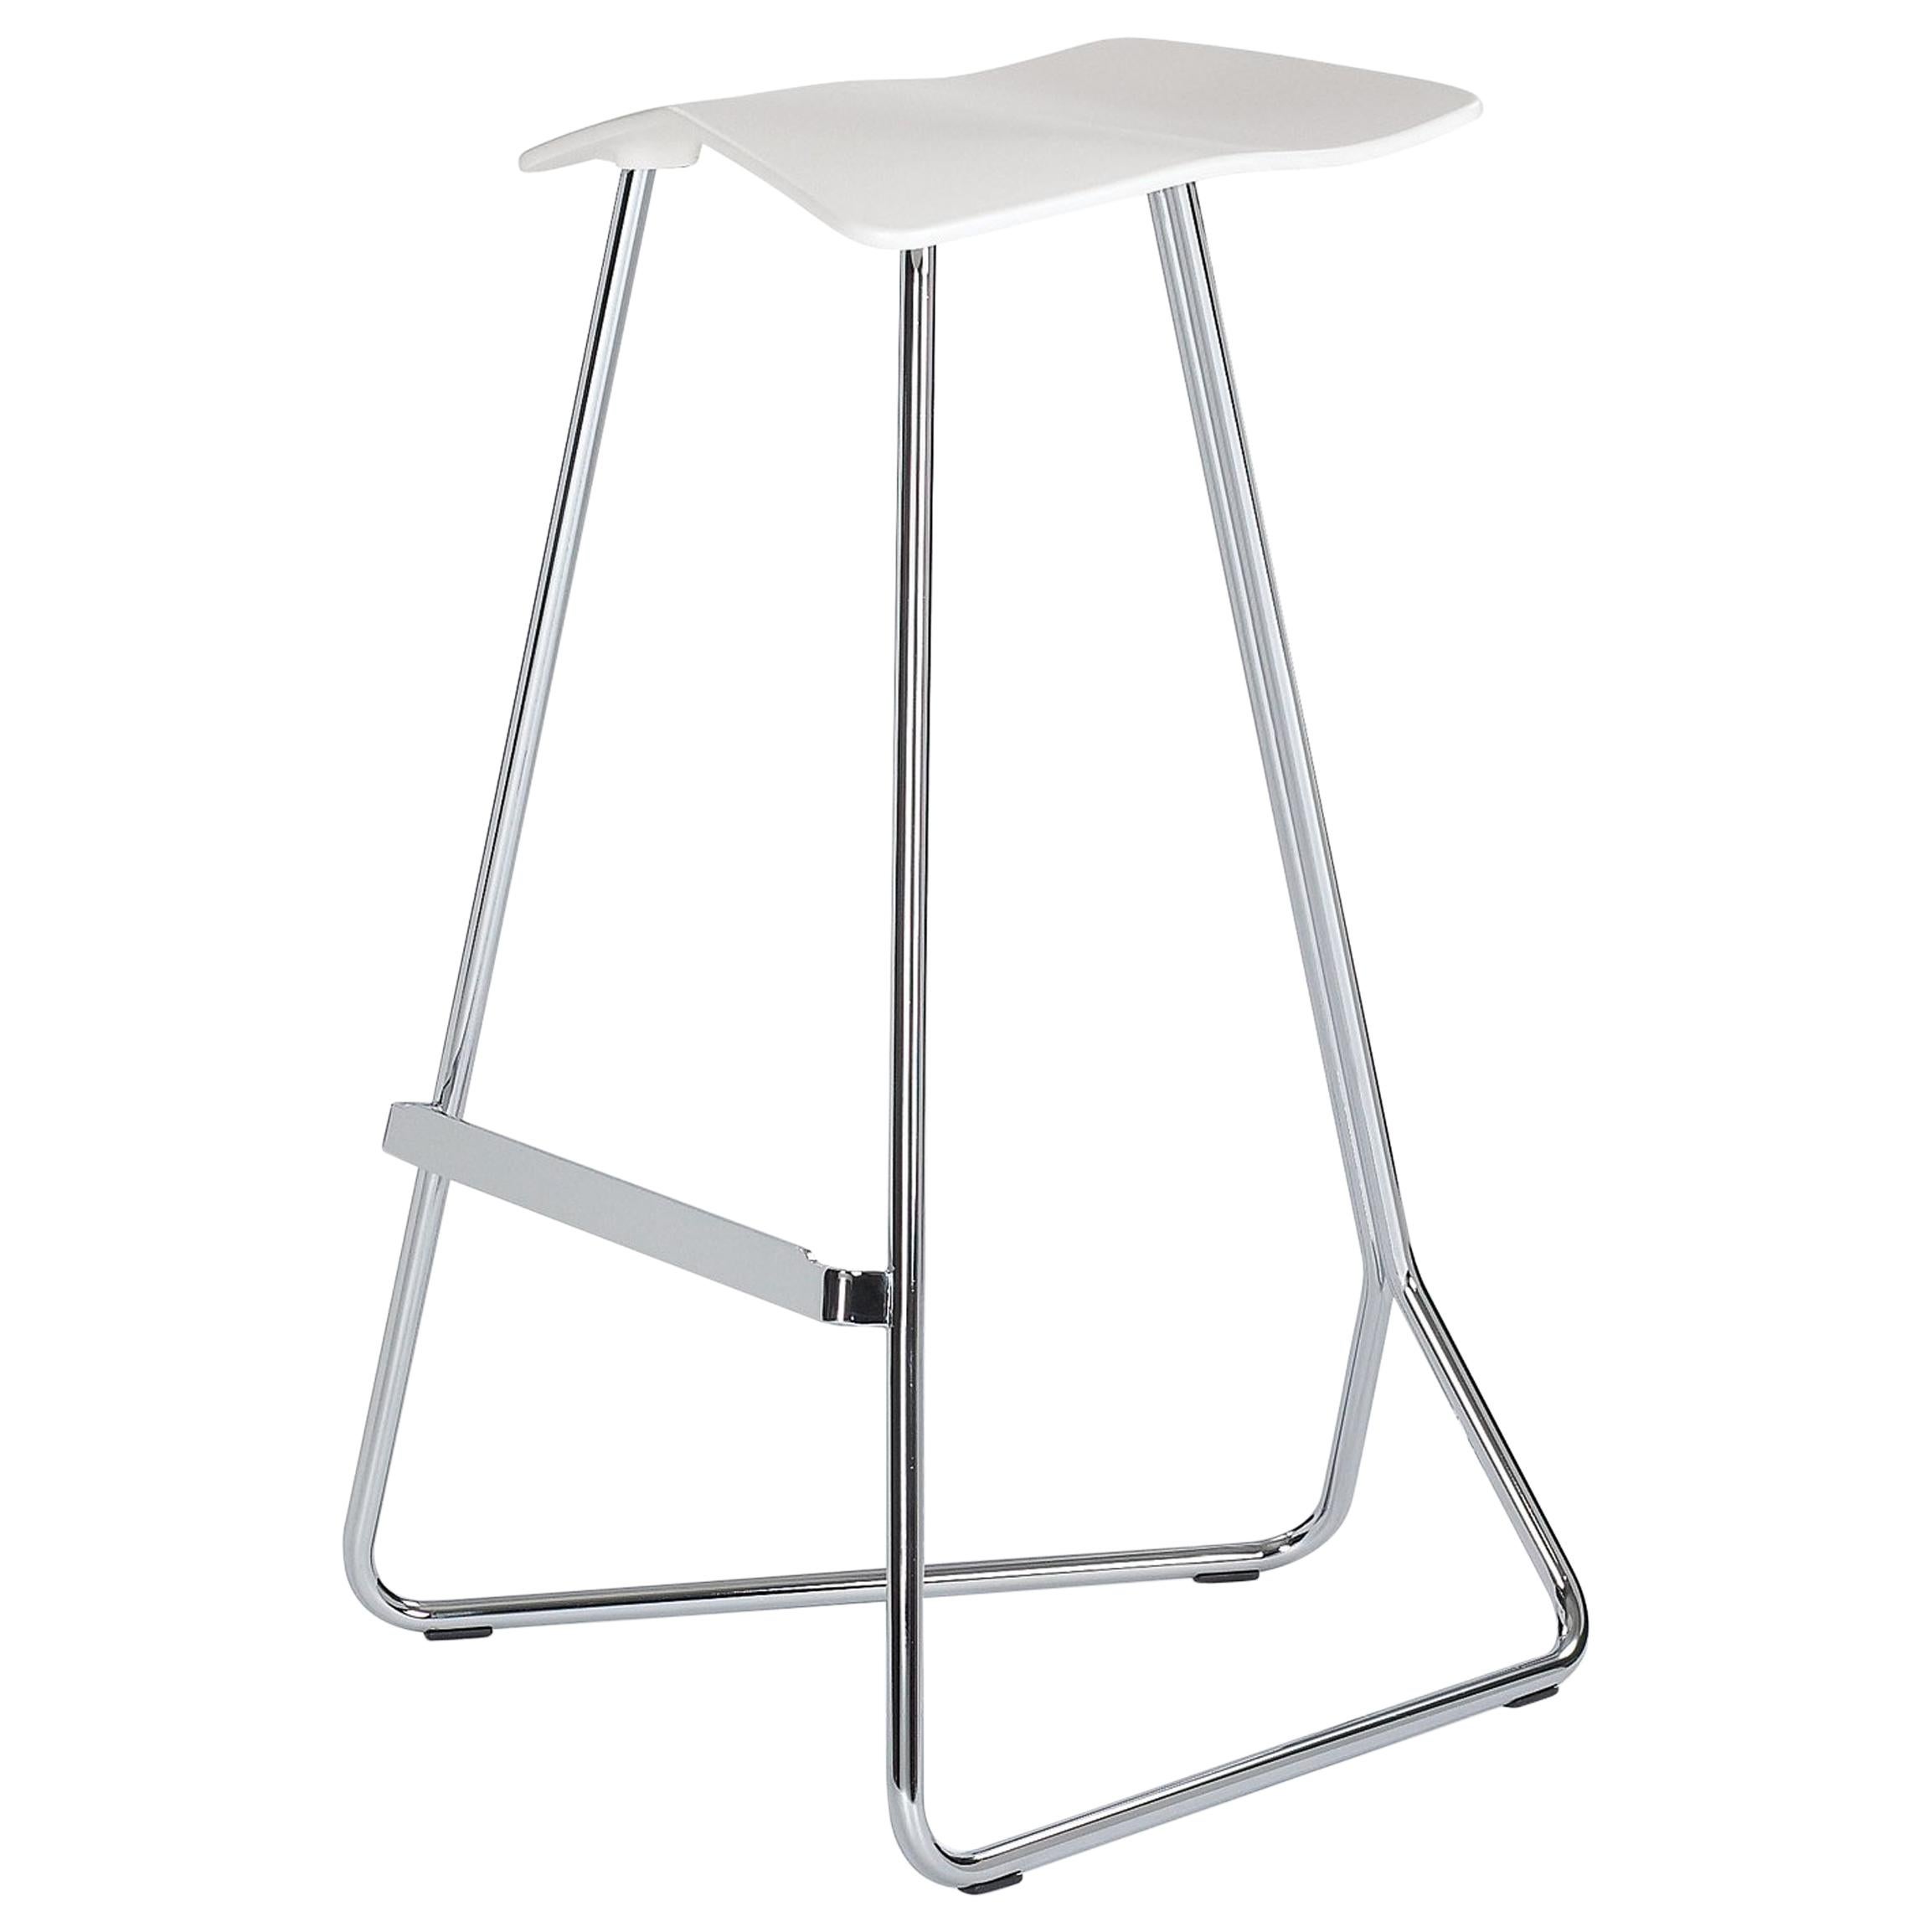 ClassiCon Triton Bar Stool in Cream PU and Chrome by Clemens Weisshaar